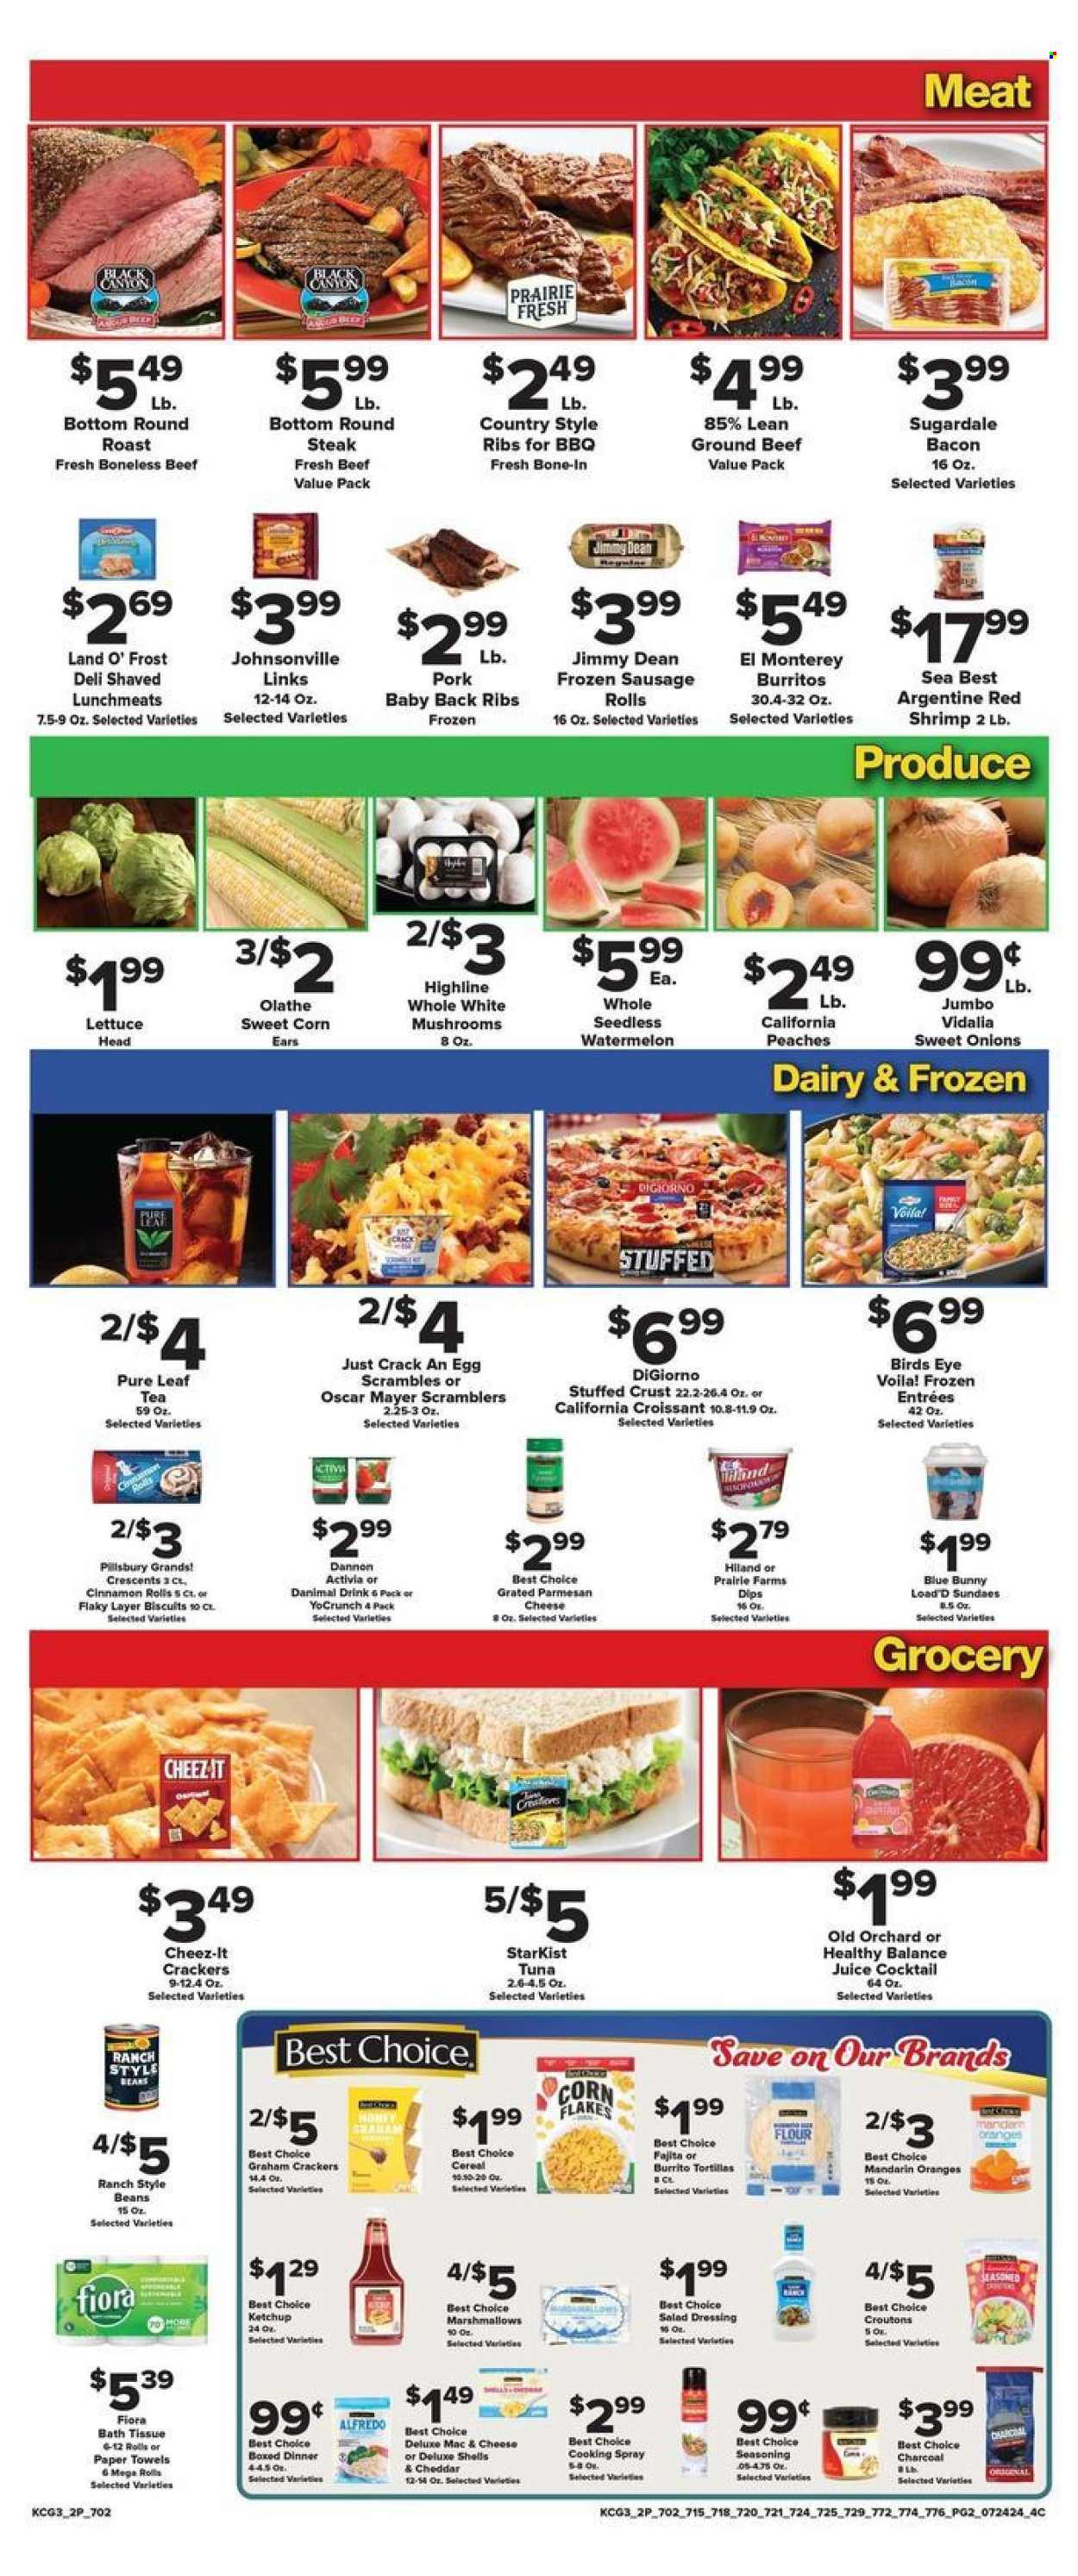 thumbnail - Brothers Market Flyer - 07/24/2024 - 07/30/2024 - Sales products - mushrooms, sausage rolls, tortillas, croissant, cinnamon roll, beans, onion, lettuce, sweet corn, mandarines, watermelon, peaches, tuna, seafood, shrimps, StarKist, macaroni & cheese, Pillsbury, Bird's Eye, burrito, Jimmy Dean, Sugardale, ready meal, ham, Johnsonville, Oscar Mayer, sliced meat, lunch meat, parmesan, cheese, grated cheese, Activia, Dannon, dip, Blue Bunny, graham crackers, marshmallows, crackers, biscuit, Cheez-It, salty snack, croutons, canned tuna, canned fish, cereals, corn flakes, spice, seasoning, salad dressing, ketchup, dressing, cooking spray, fruit drink, ice tea, Pure Leaf, beef meat, steak, round roast, round steak, ribs, pork meat, pork ribs, pork back ribs, country style ribs. Page 2.